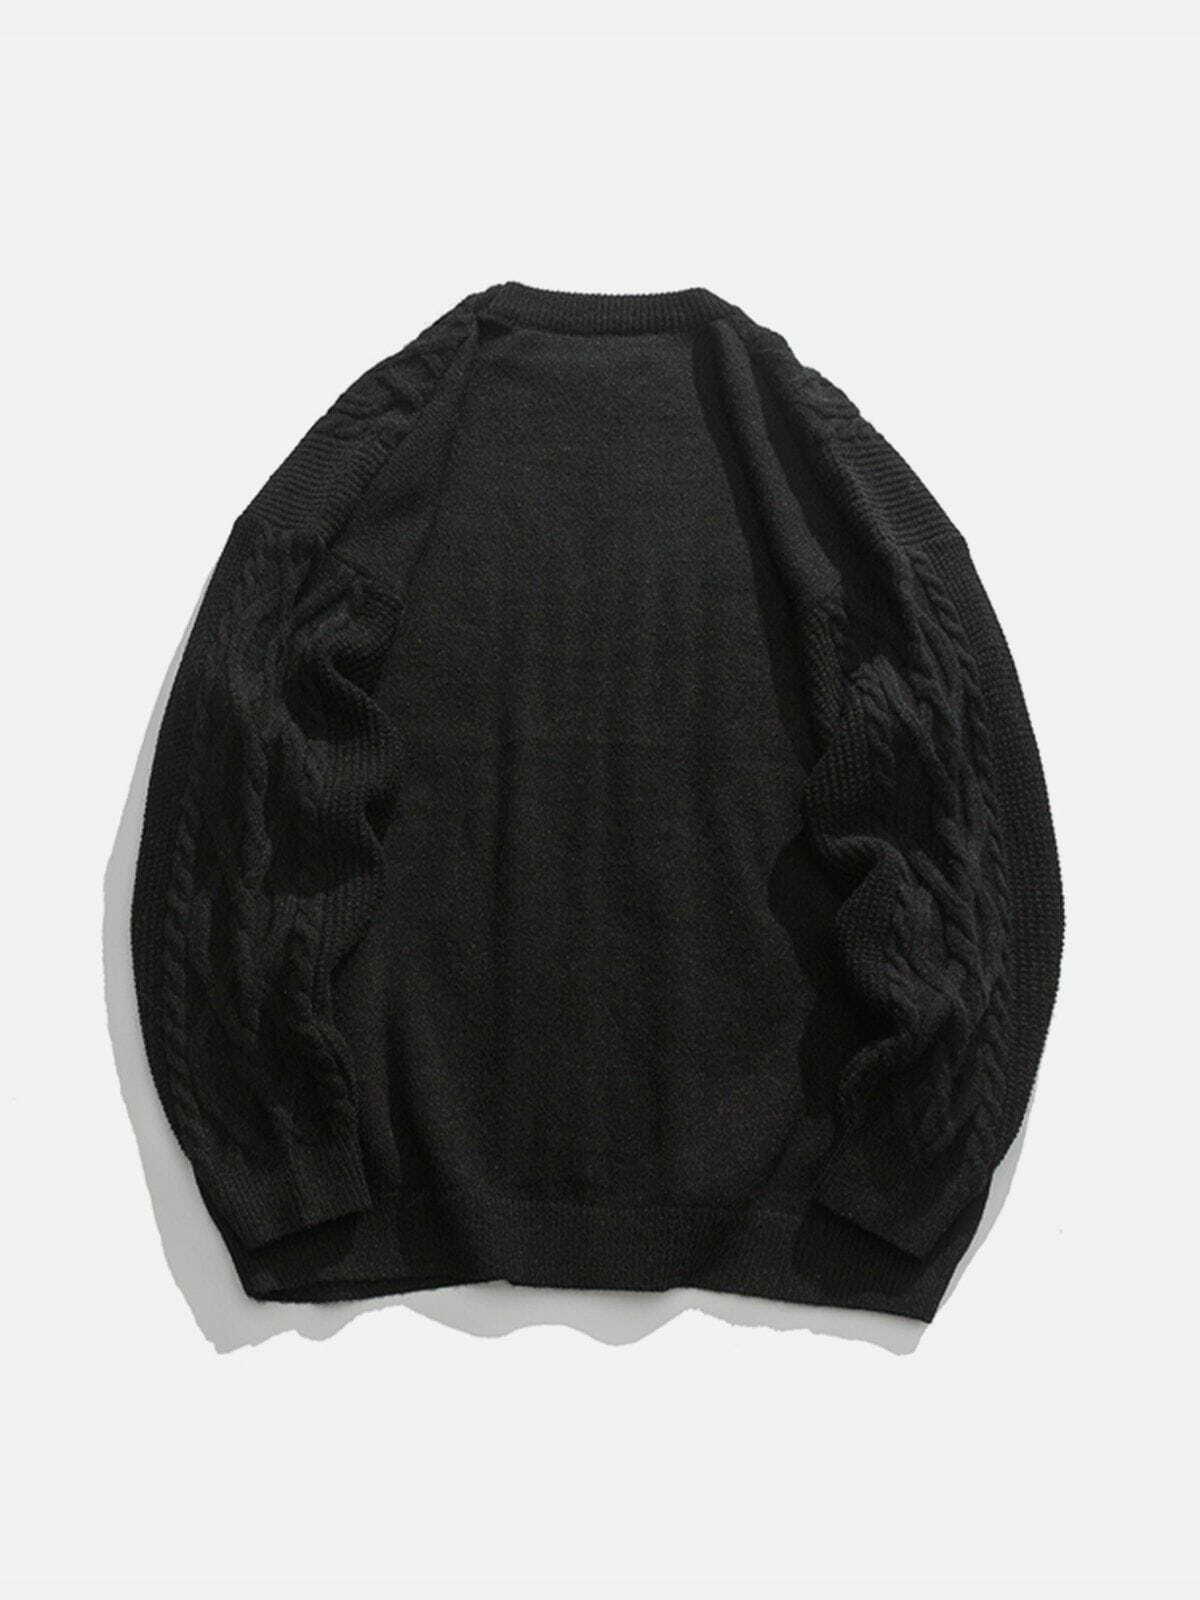 twisted crew neck sweater edgy & chic streetwear 7564